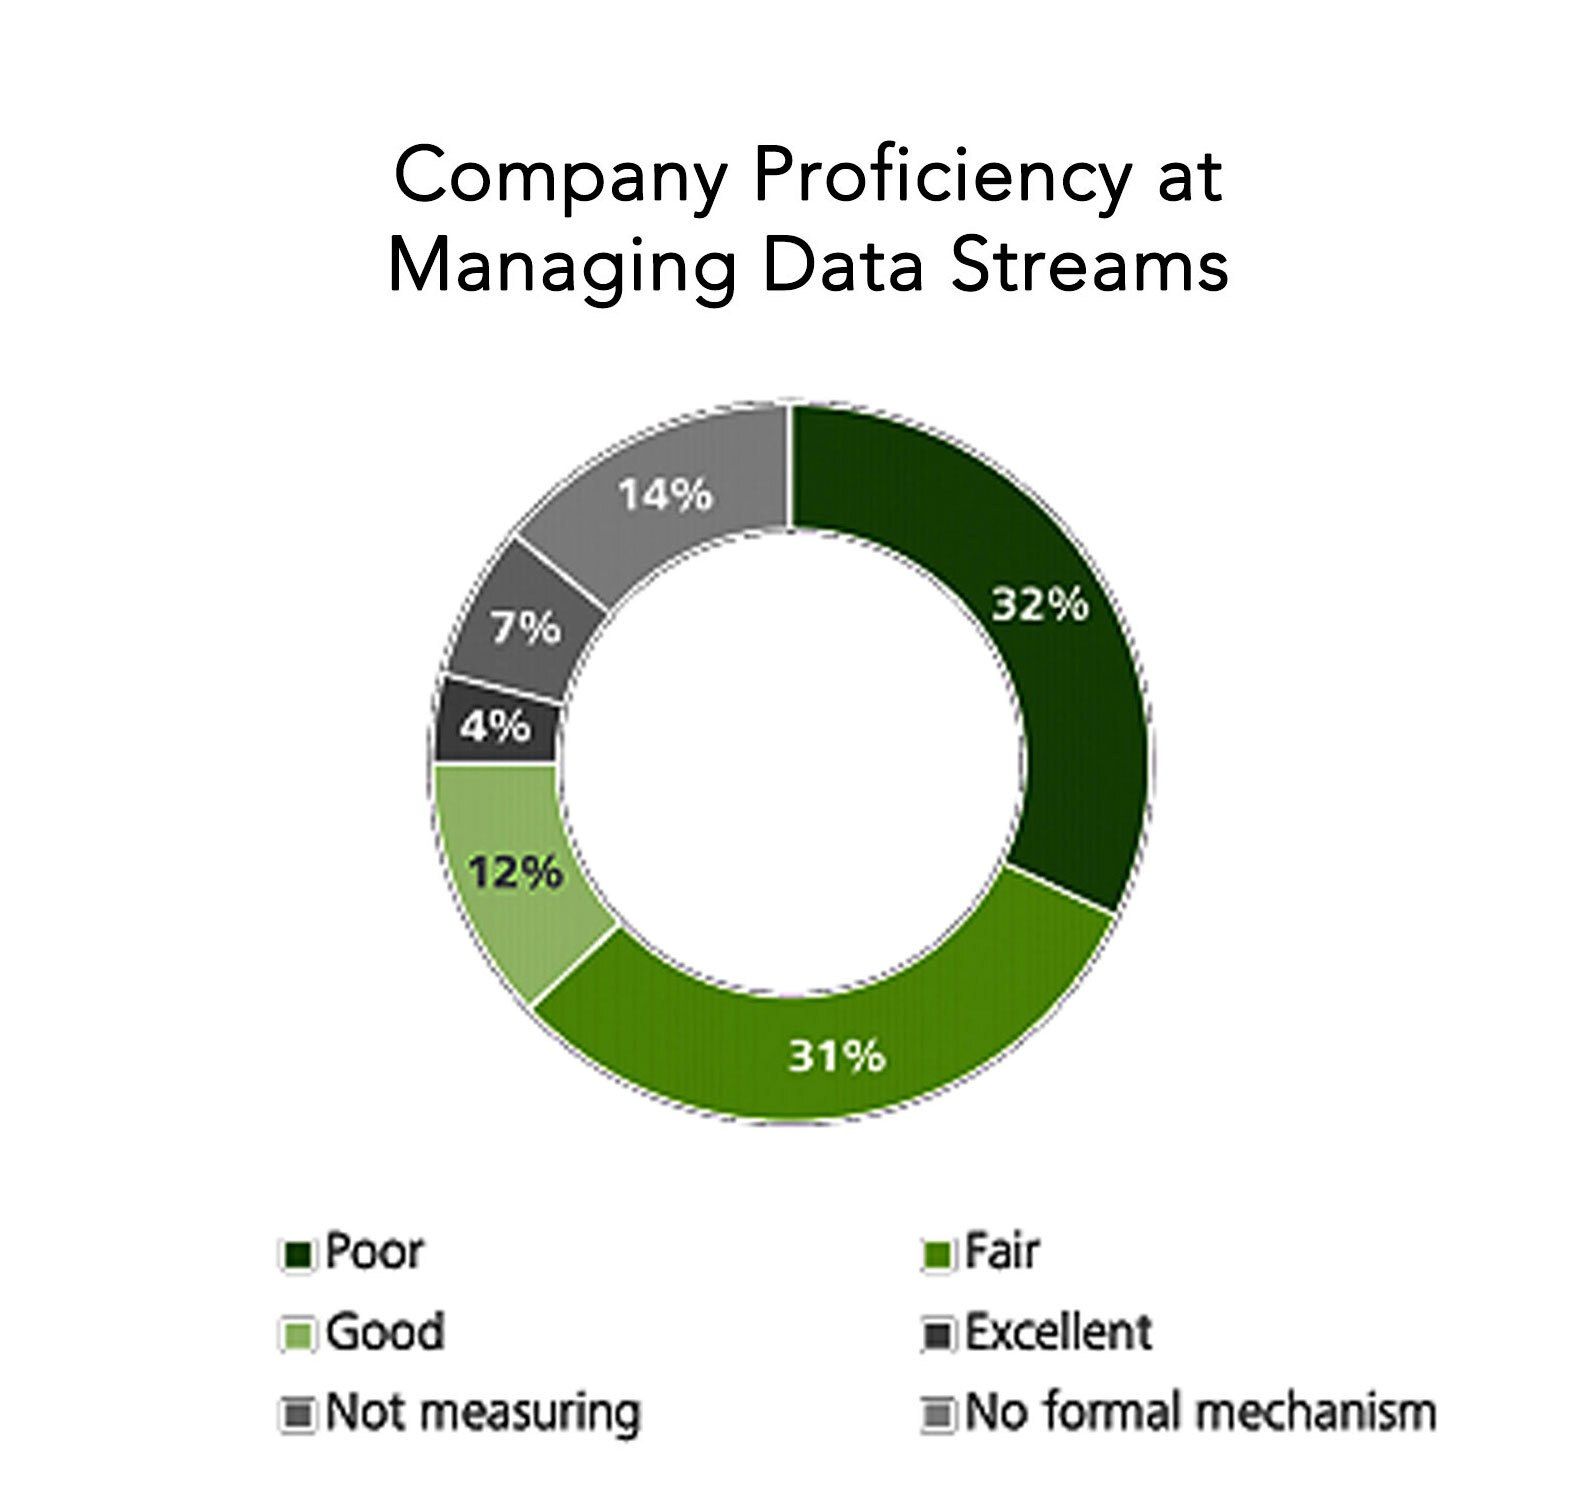 Chart 2: Company proficiency at managing data streams is limited, with only 4% considering themselves “excellent”.